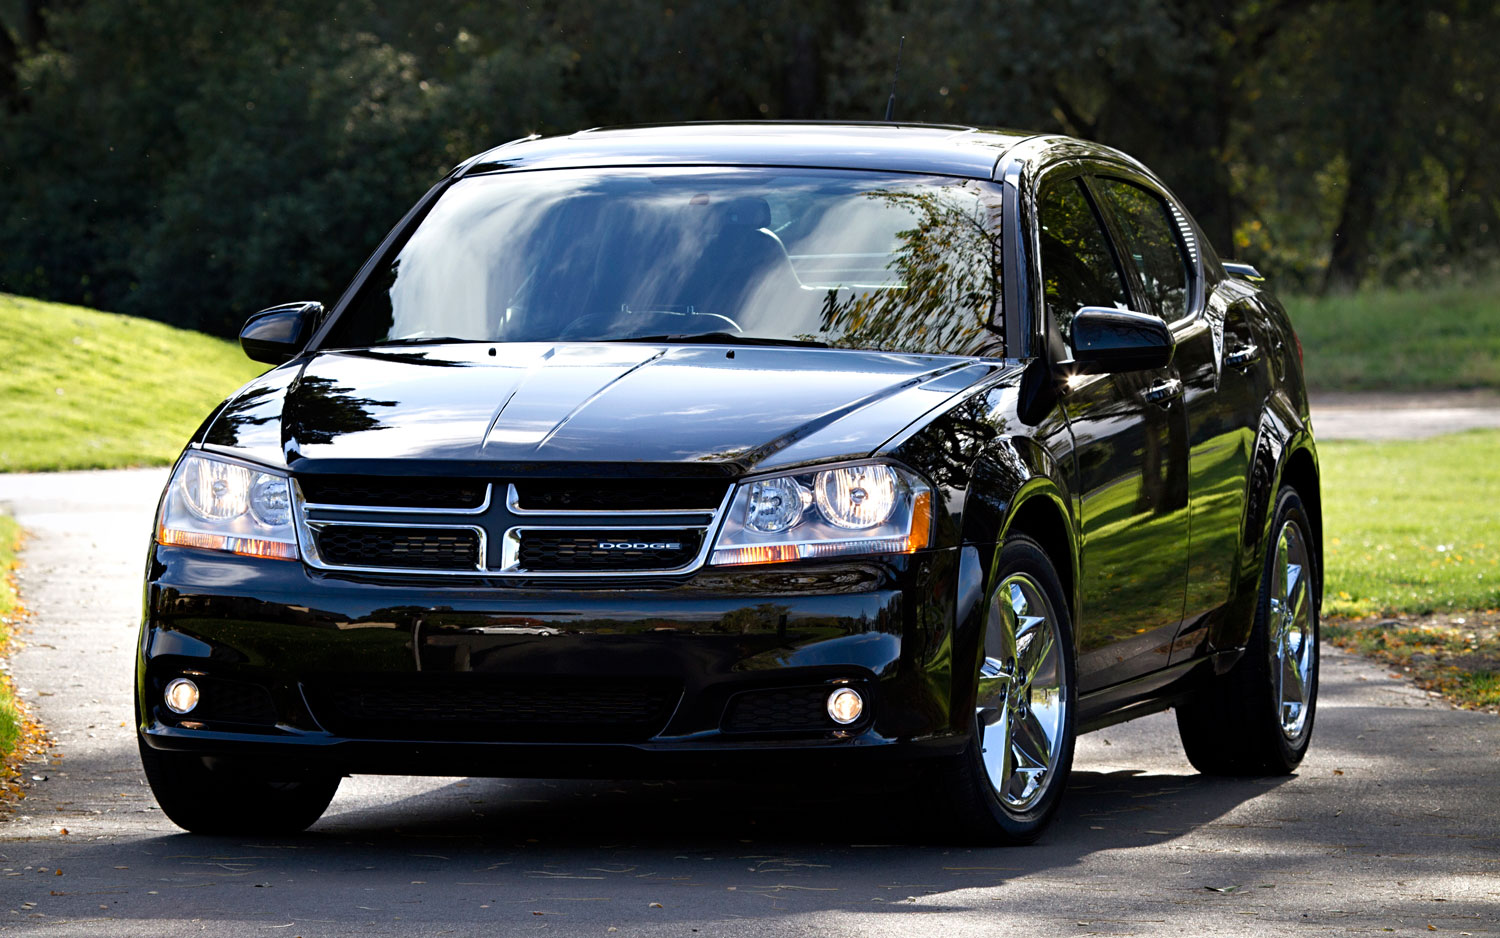 Report: 2011 Dodge Avenger Has The Most American-Sourced Content